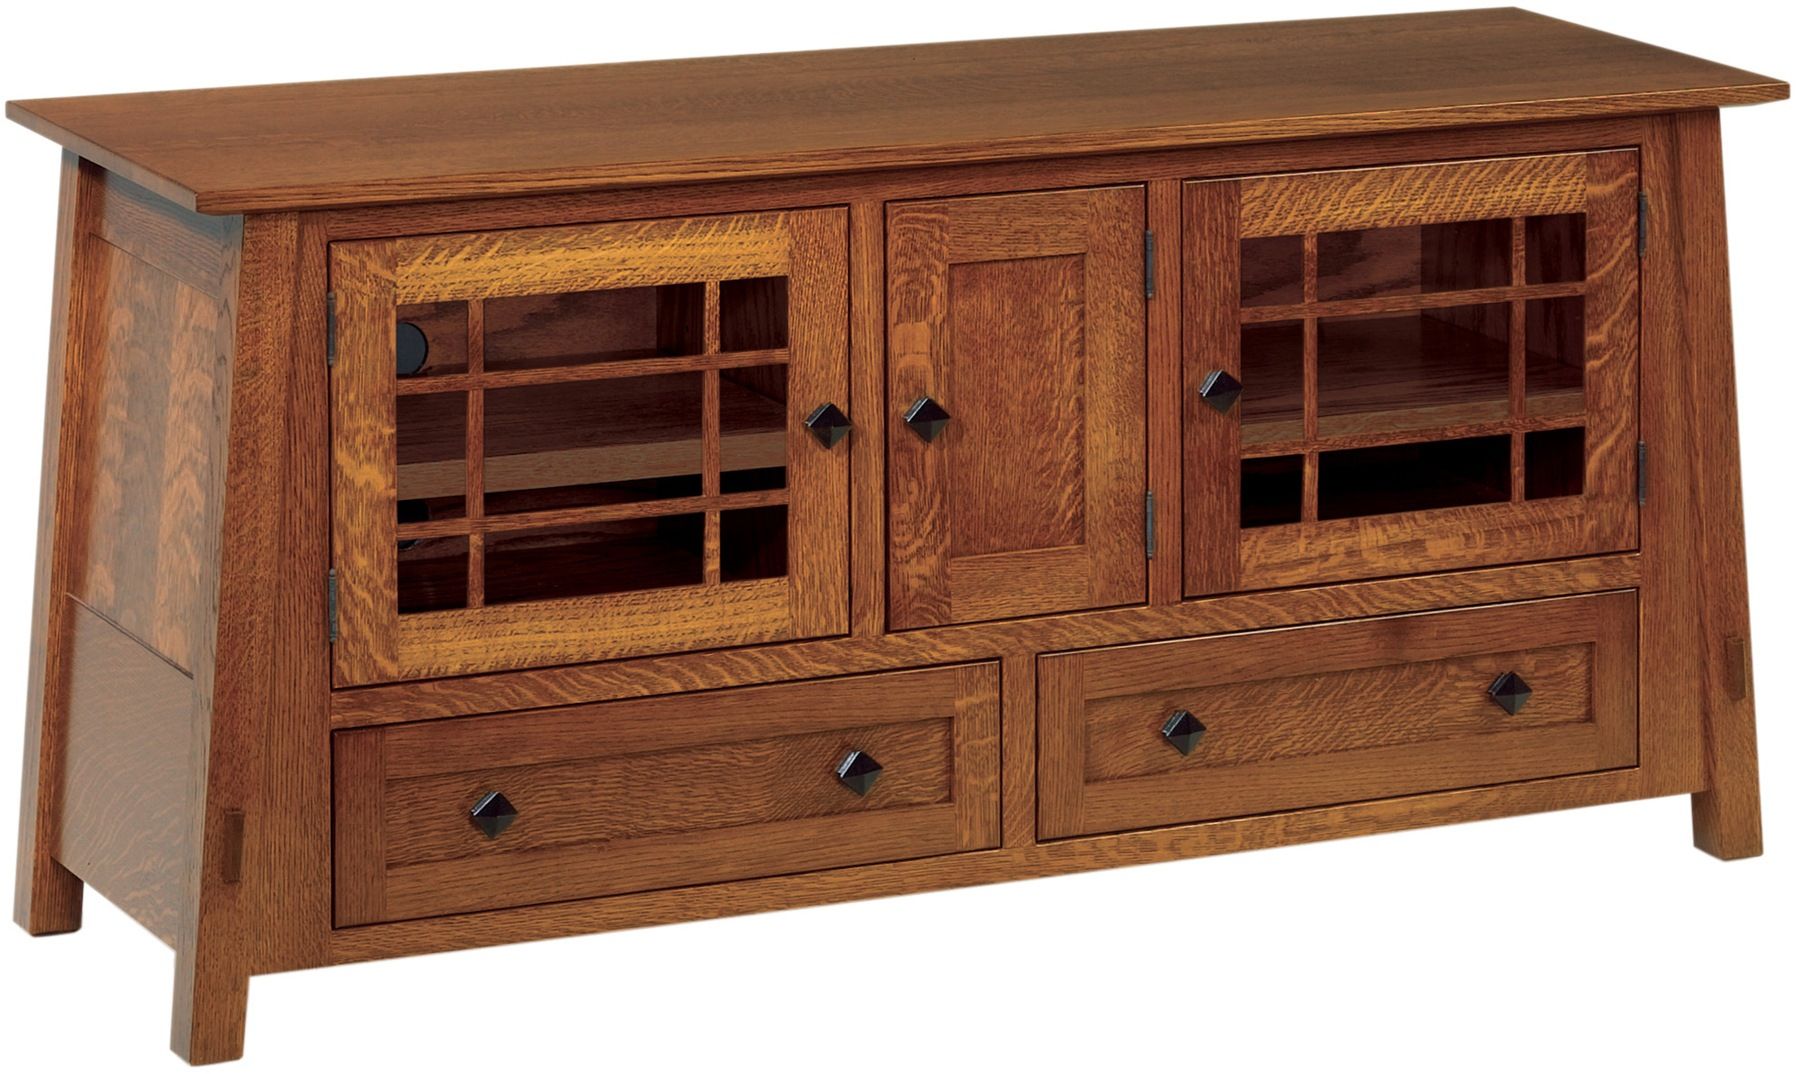 Amish Mccoy Tv Cabinet With Drawers Collection | Mccoy Tv With Tv Cabinets With Drawers (View 4 of 15)